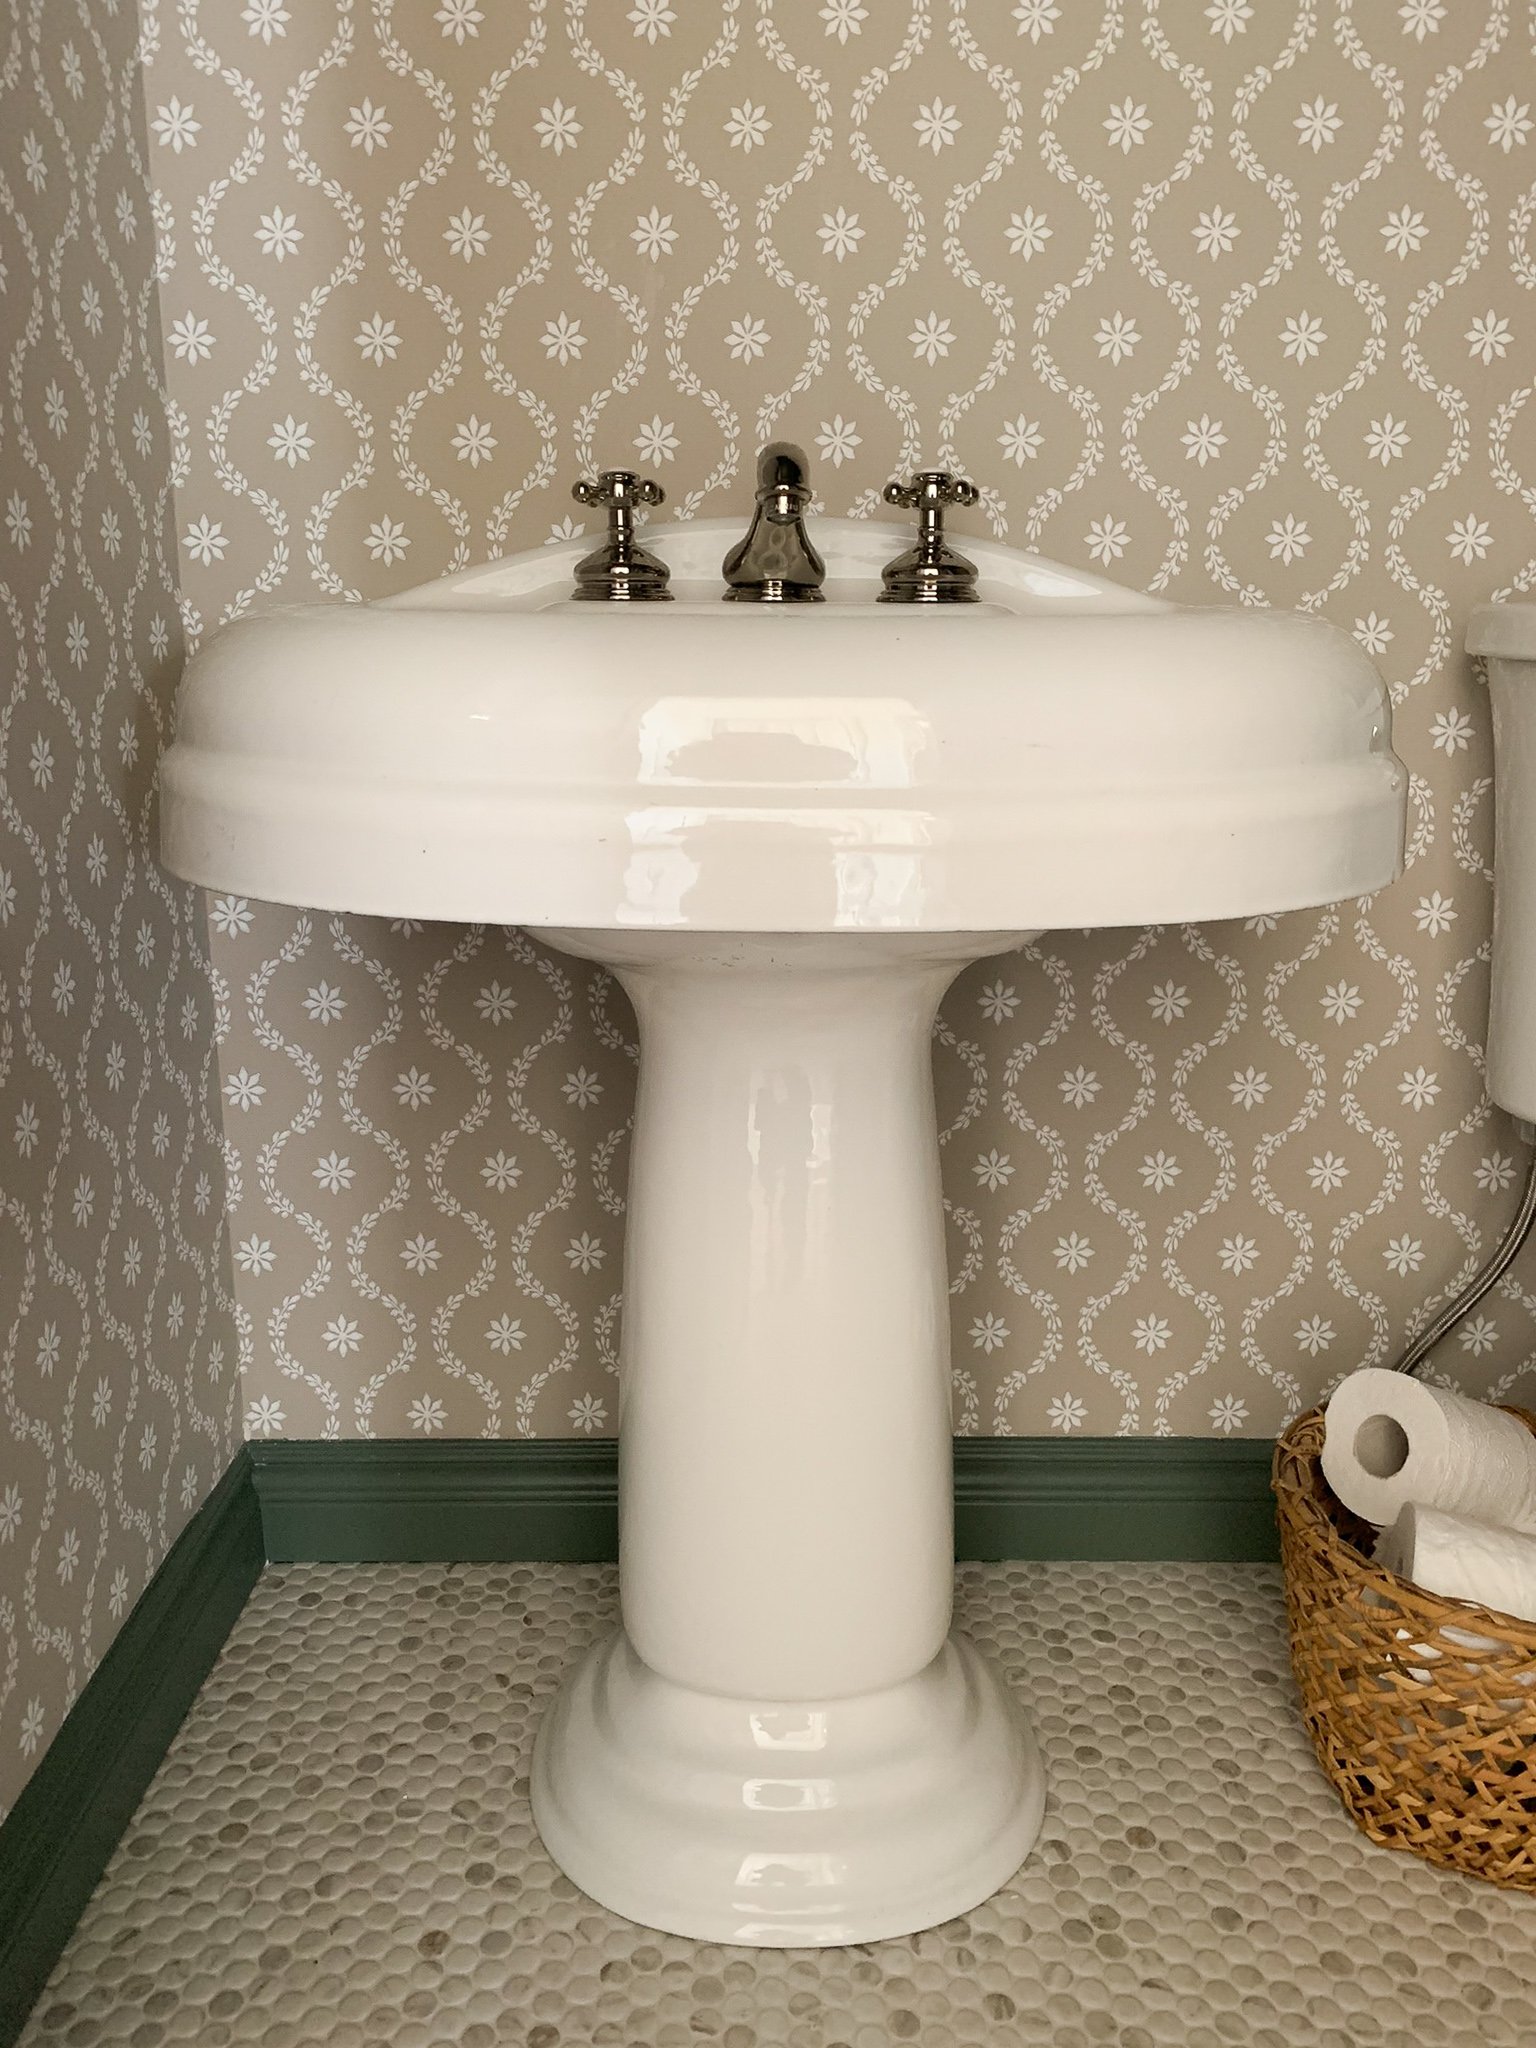 Vintage pedestal sinkw tih polished nickel fixtures and floral wallpaper, green trim and penny tile 